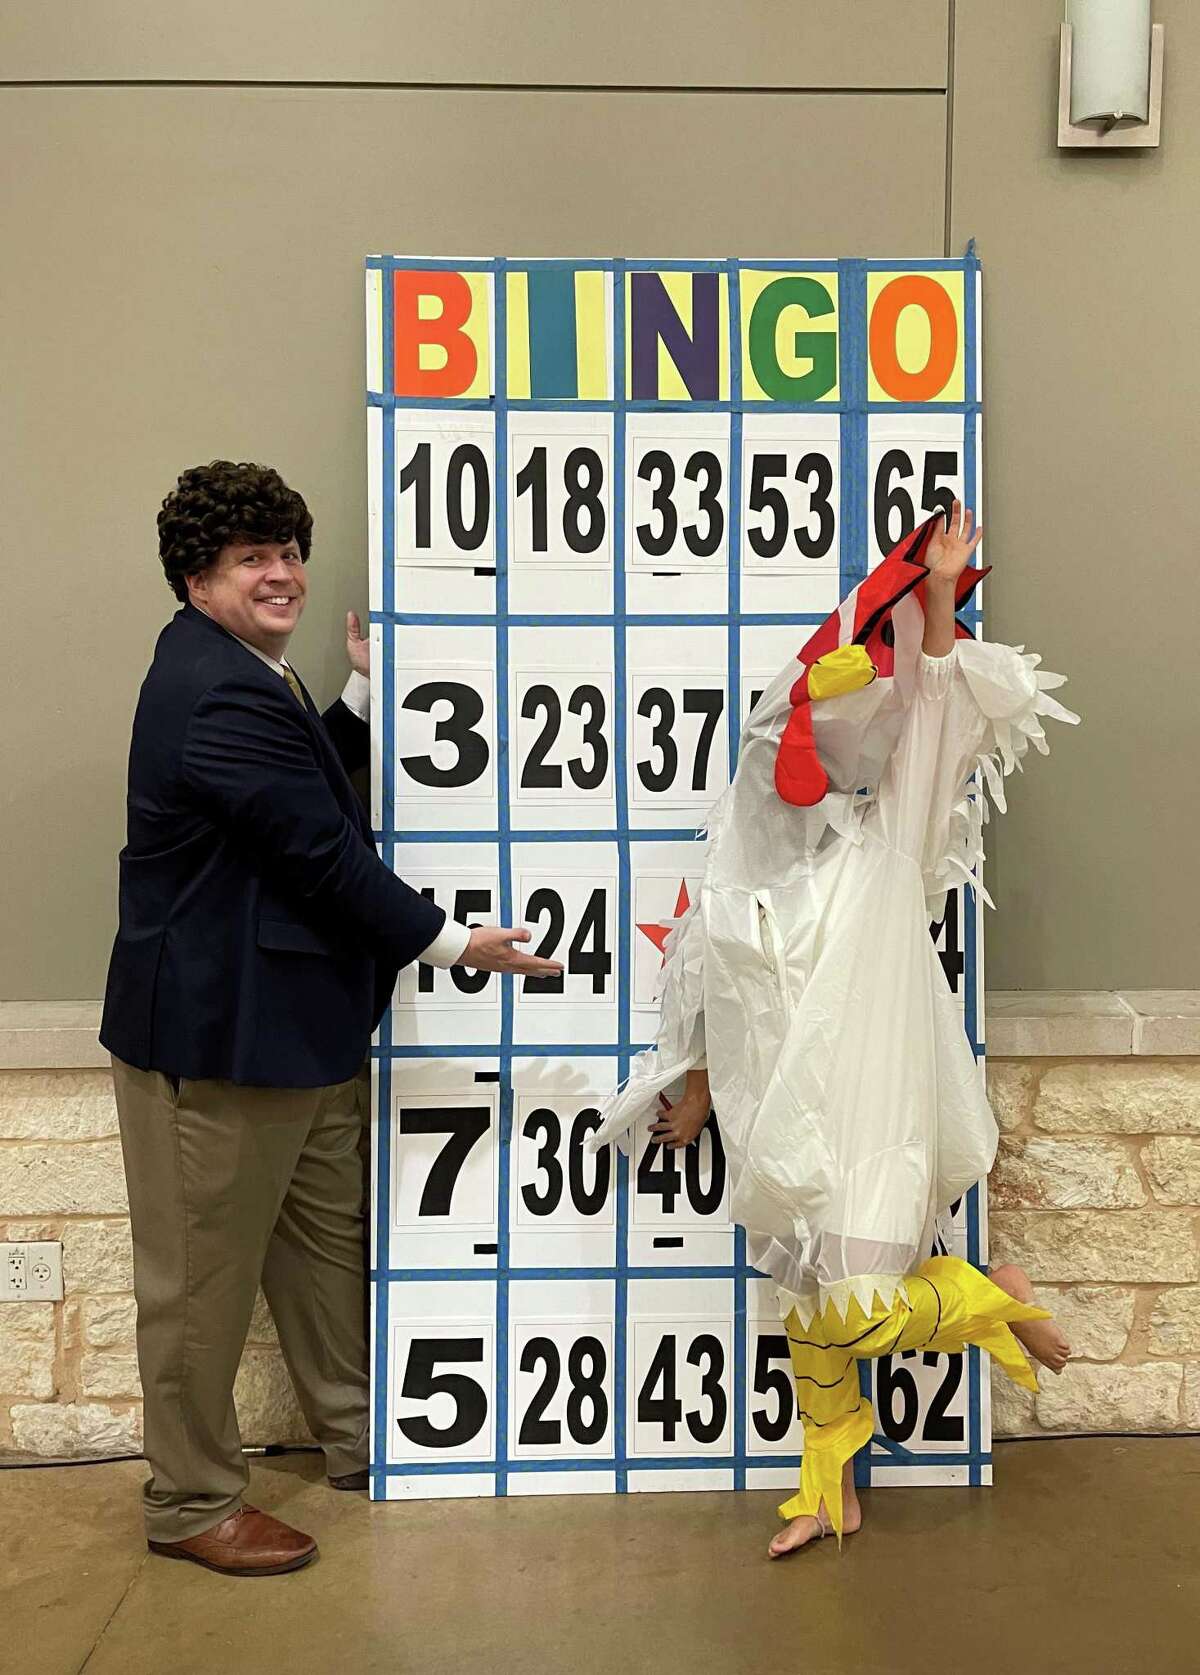 What do you do when the speaker cancels? Well, the Conroe Noon Lions Club had fun playing a game of Chicken ‘poo’ Bingo last week. Hosted by club President Warner ‘Wink’ Phelps and member Becca ‘the Beak’ Ellis.